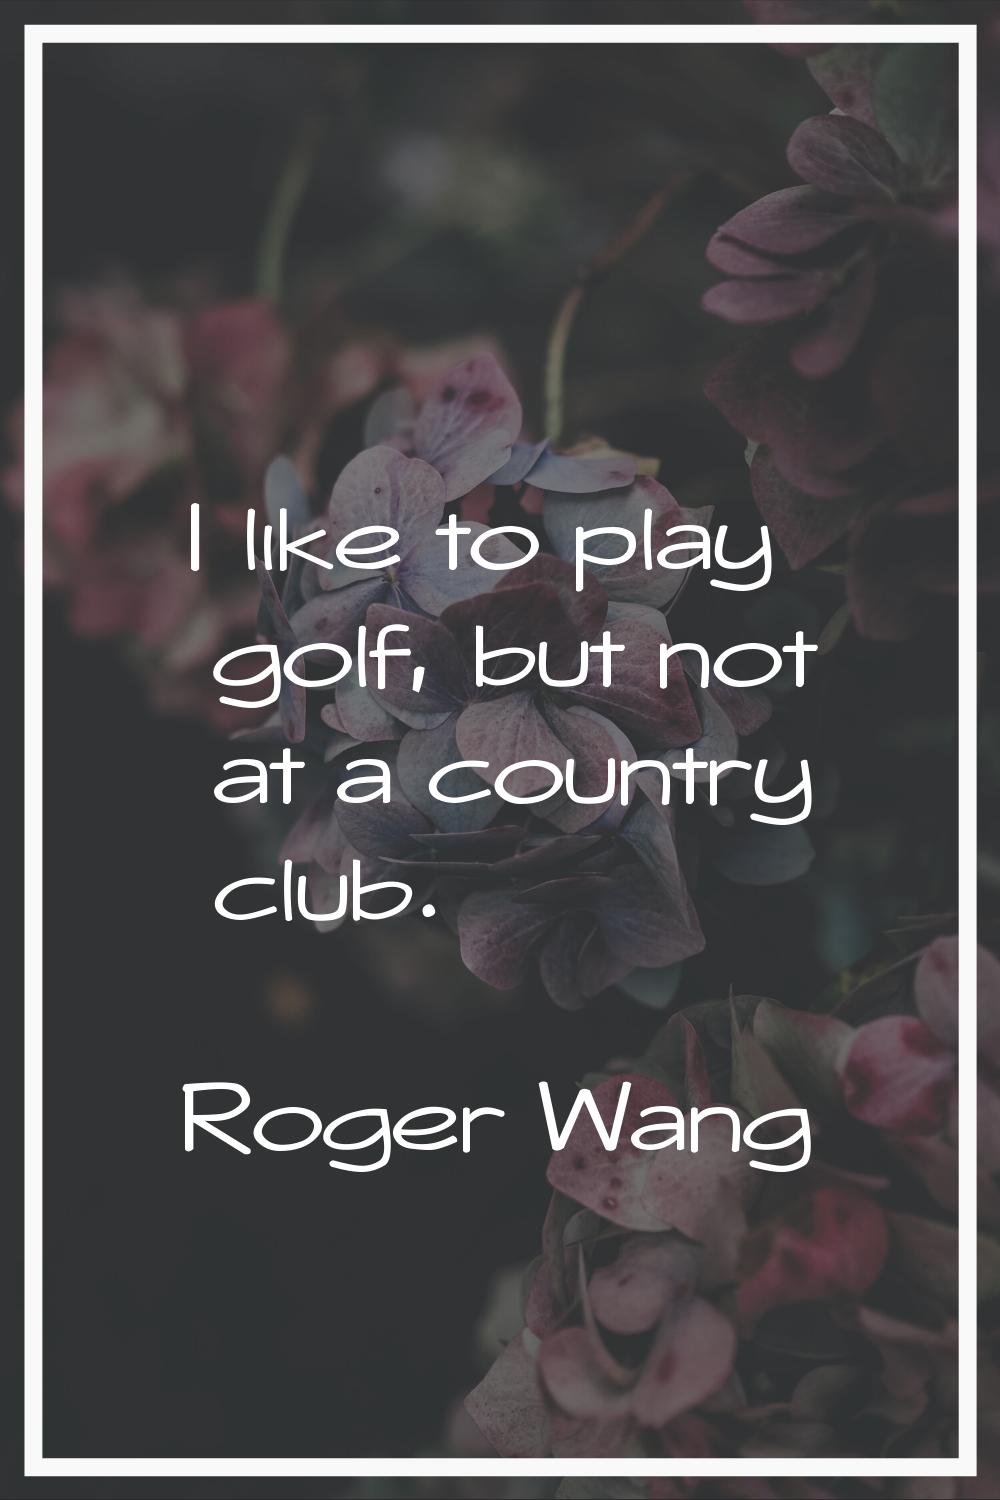 I like to play golf, but not at a country club.